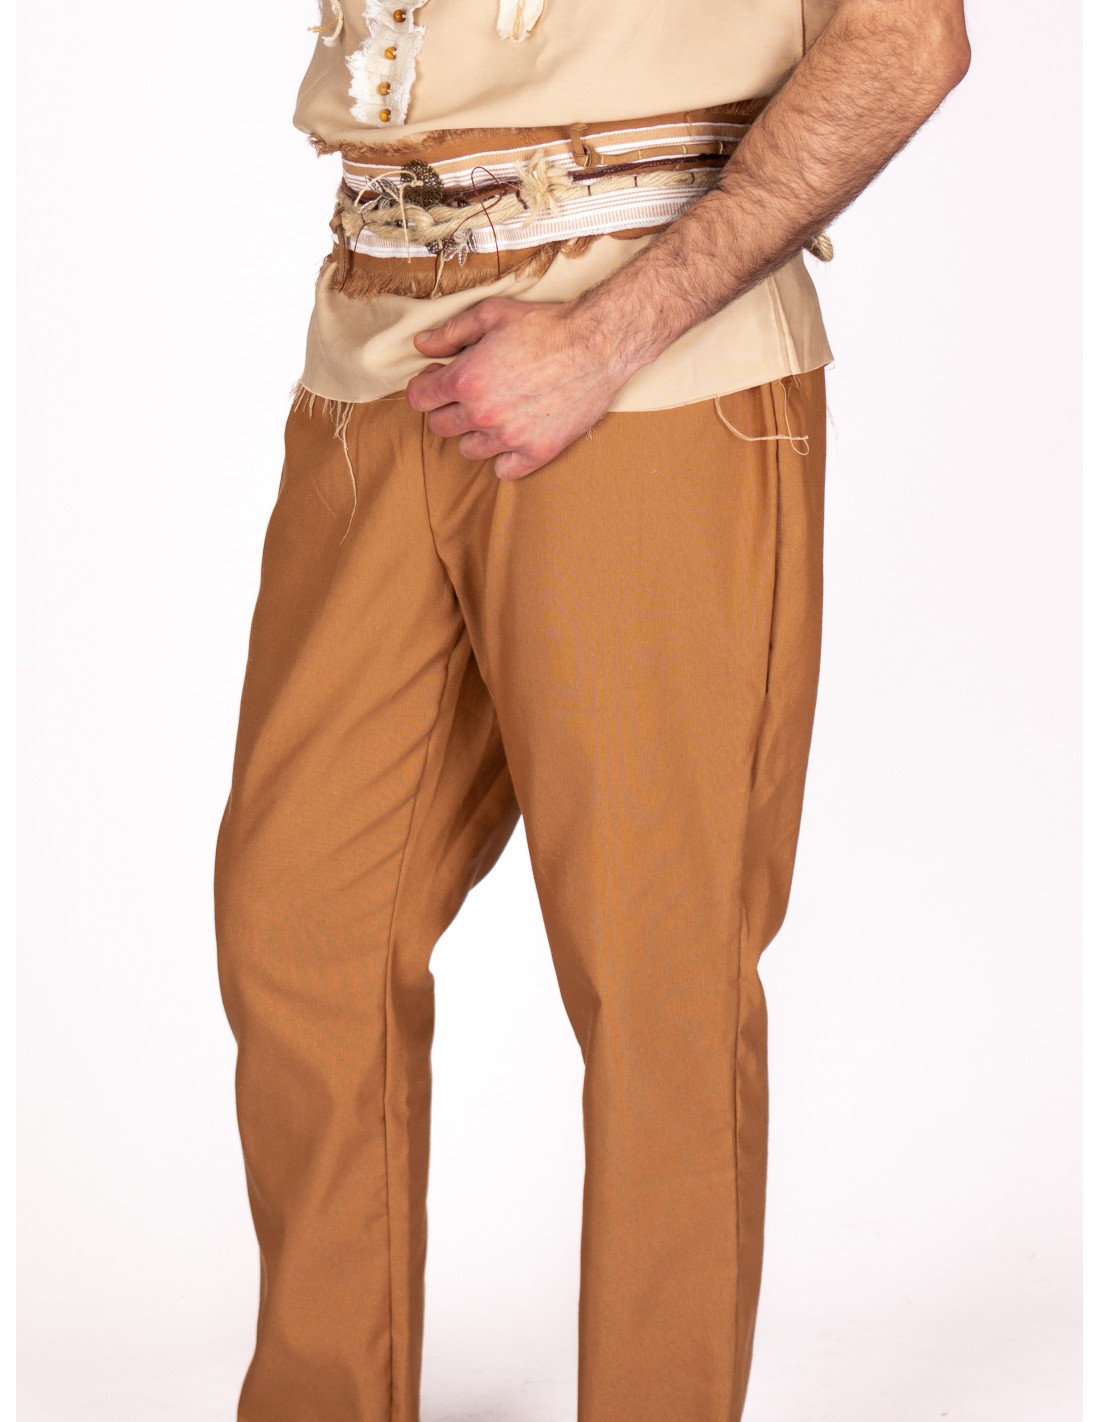 Medieval trousers, Celtic or Viking plaid trousers